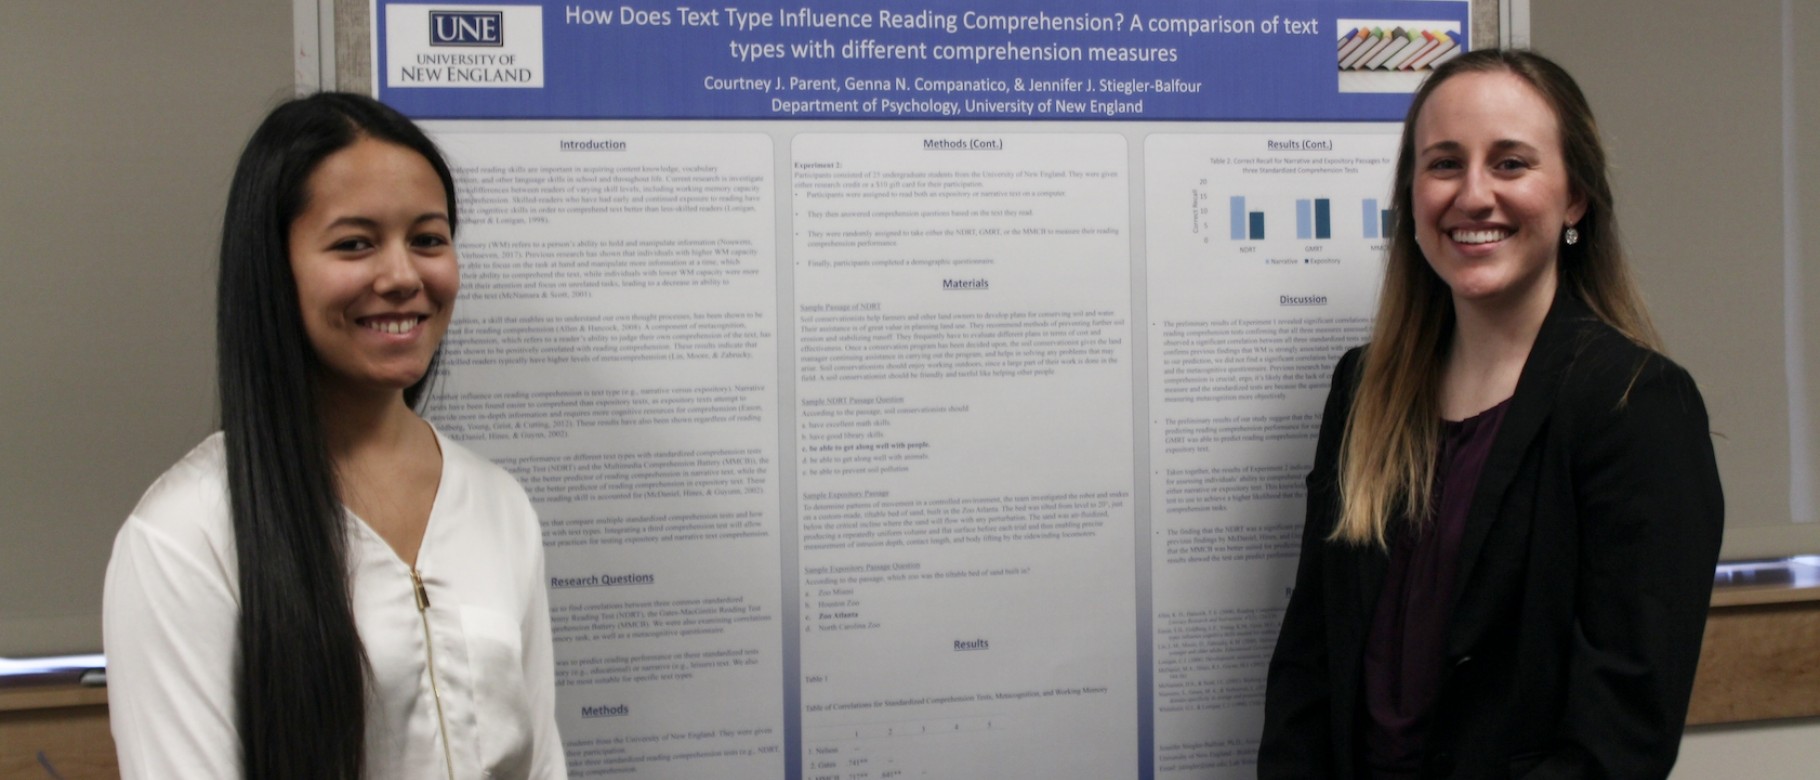  Genna Companatico and Courtney Parent present their research on how text type influences reading comprehension